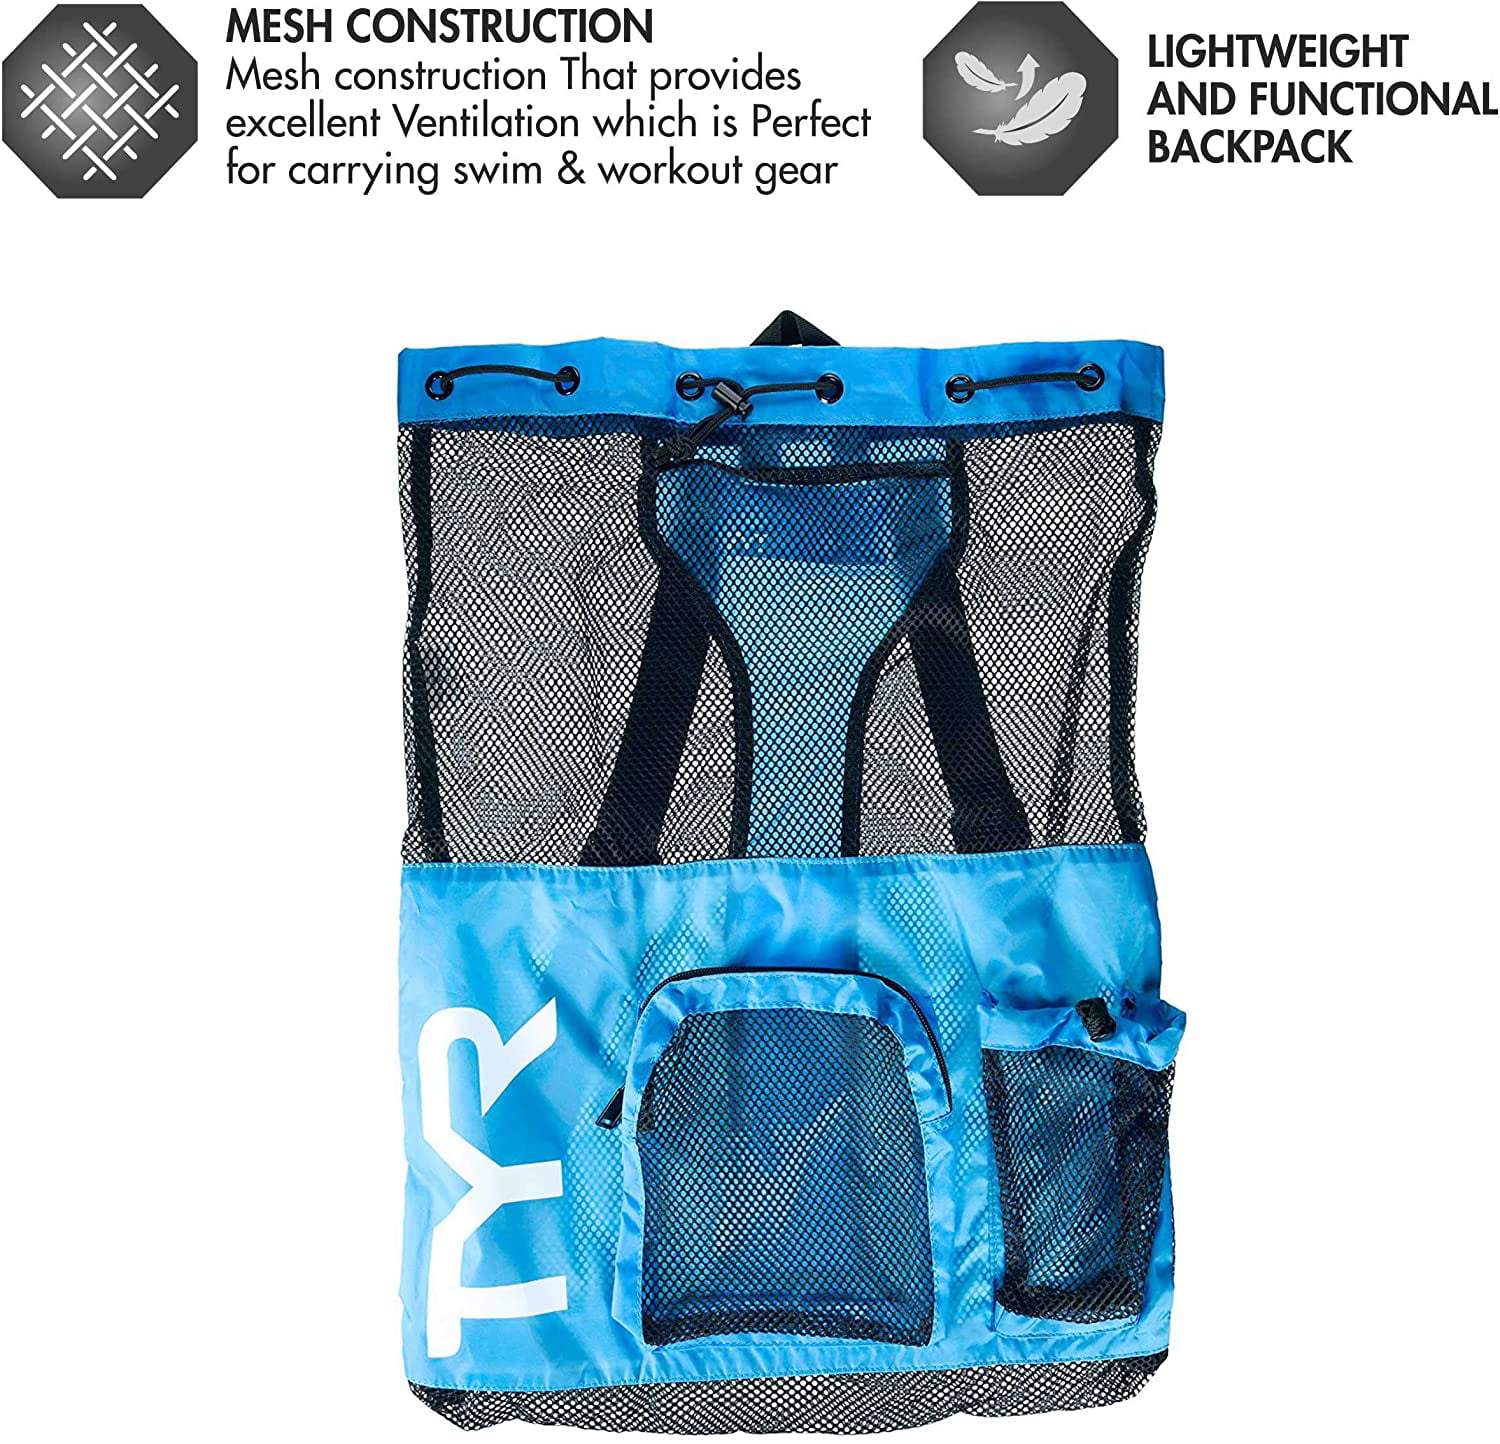 TYR Big Mesh Mummy Backpack USA with Mesh Venting to Dry Wet Gear 20% Larger 